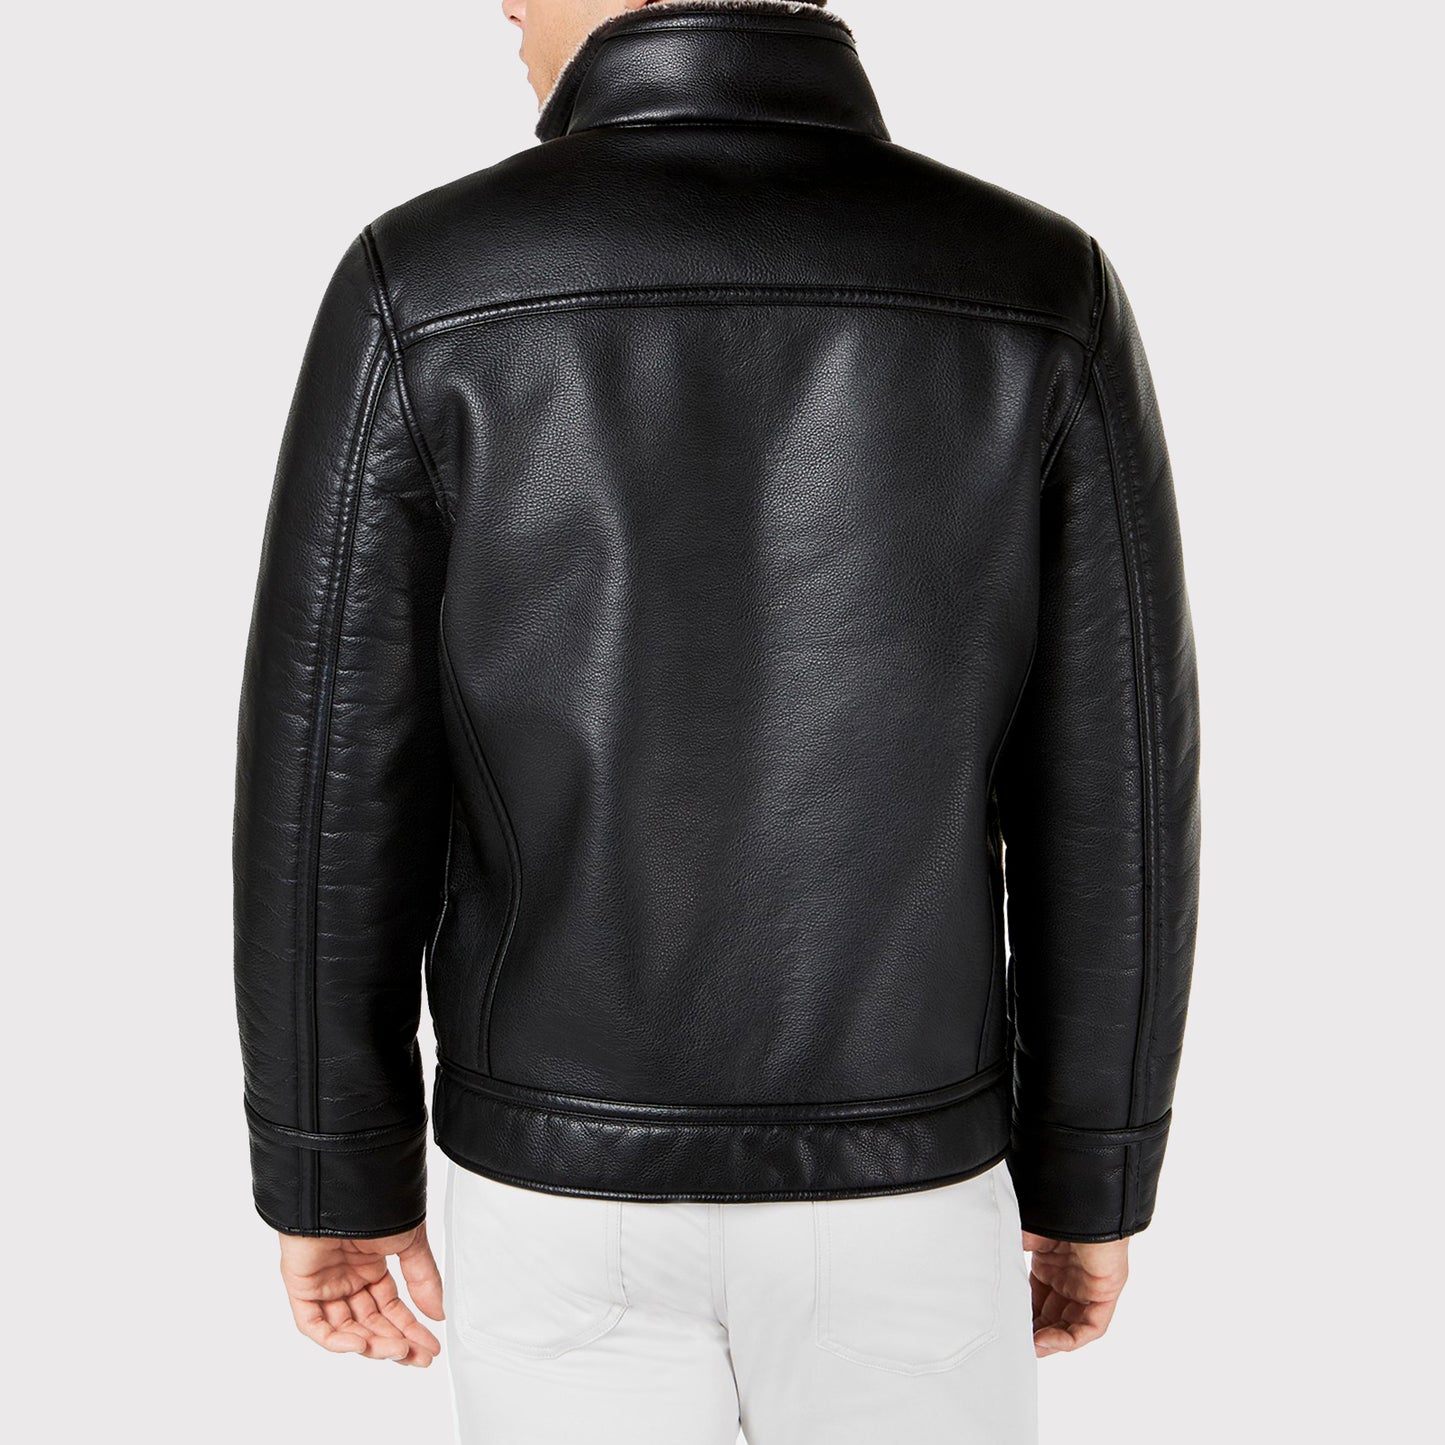 Men’s Faux Leather Jacket with Shearling Lining